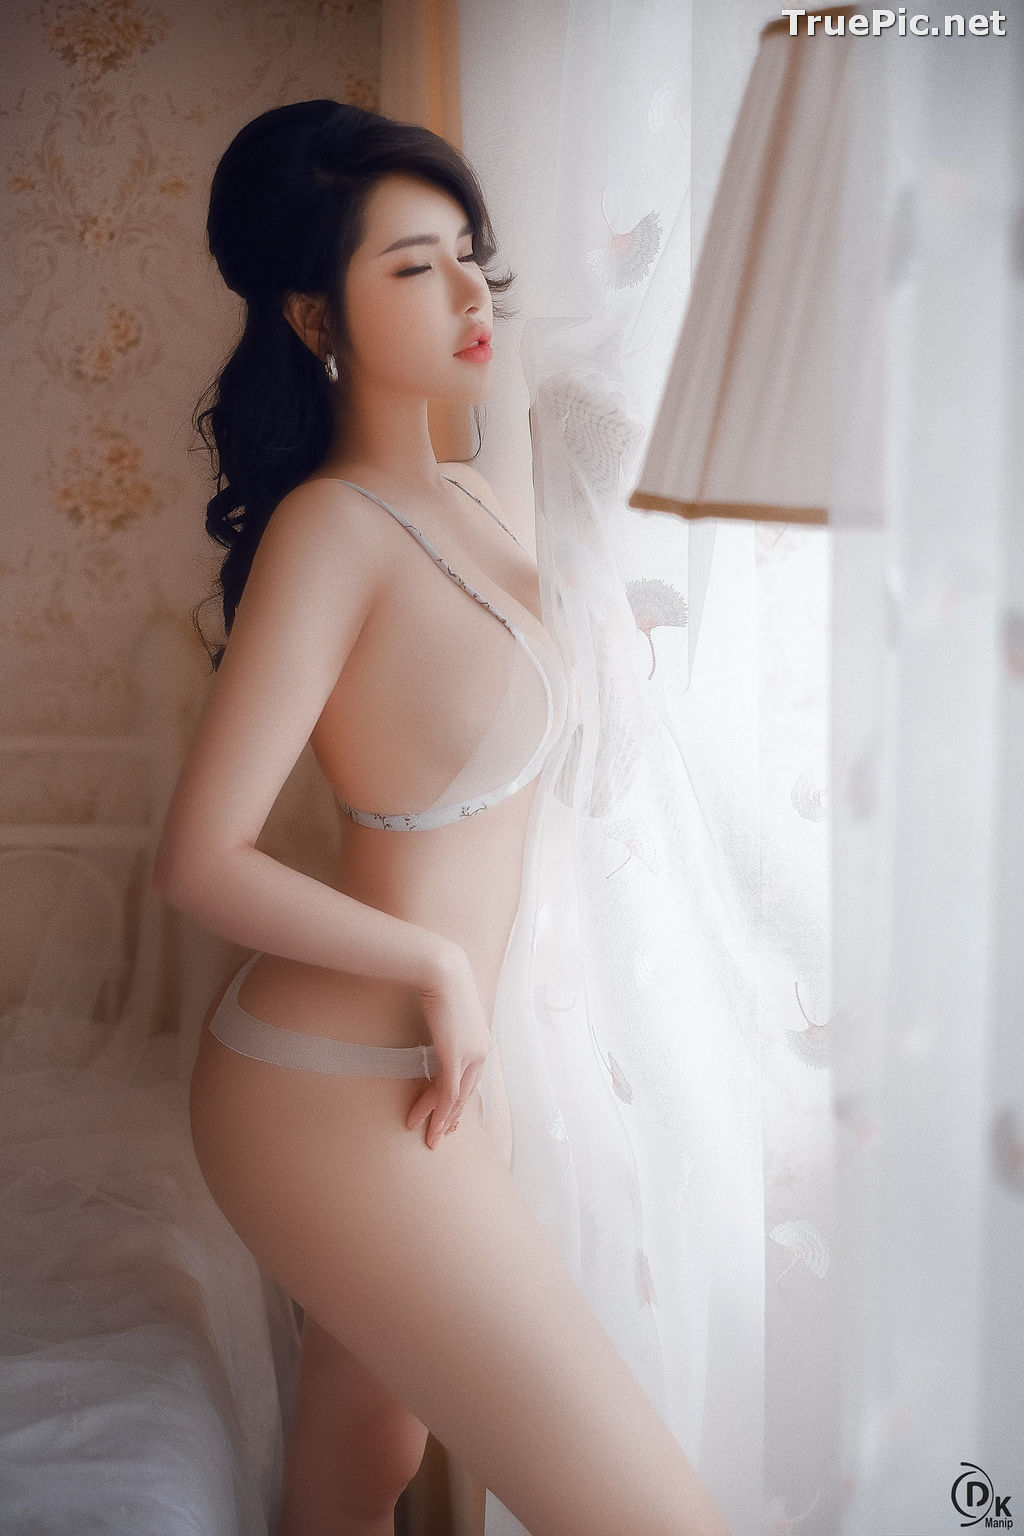 Image Vietnamese Model - Beautiful Girl in Sexy Transparent White Lingerie - TruePic.net - Picture-12